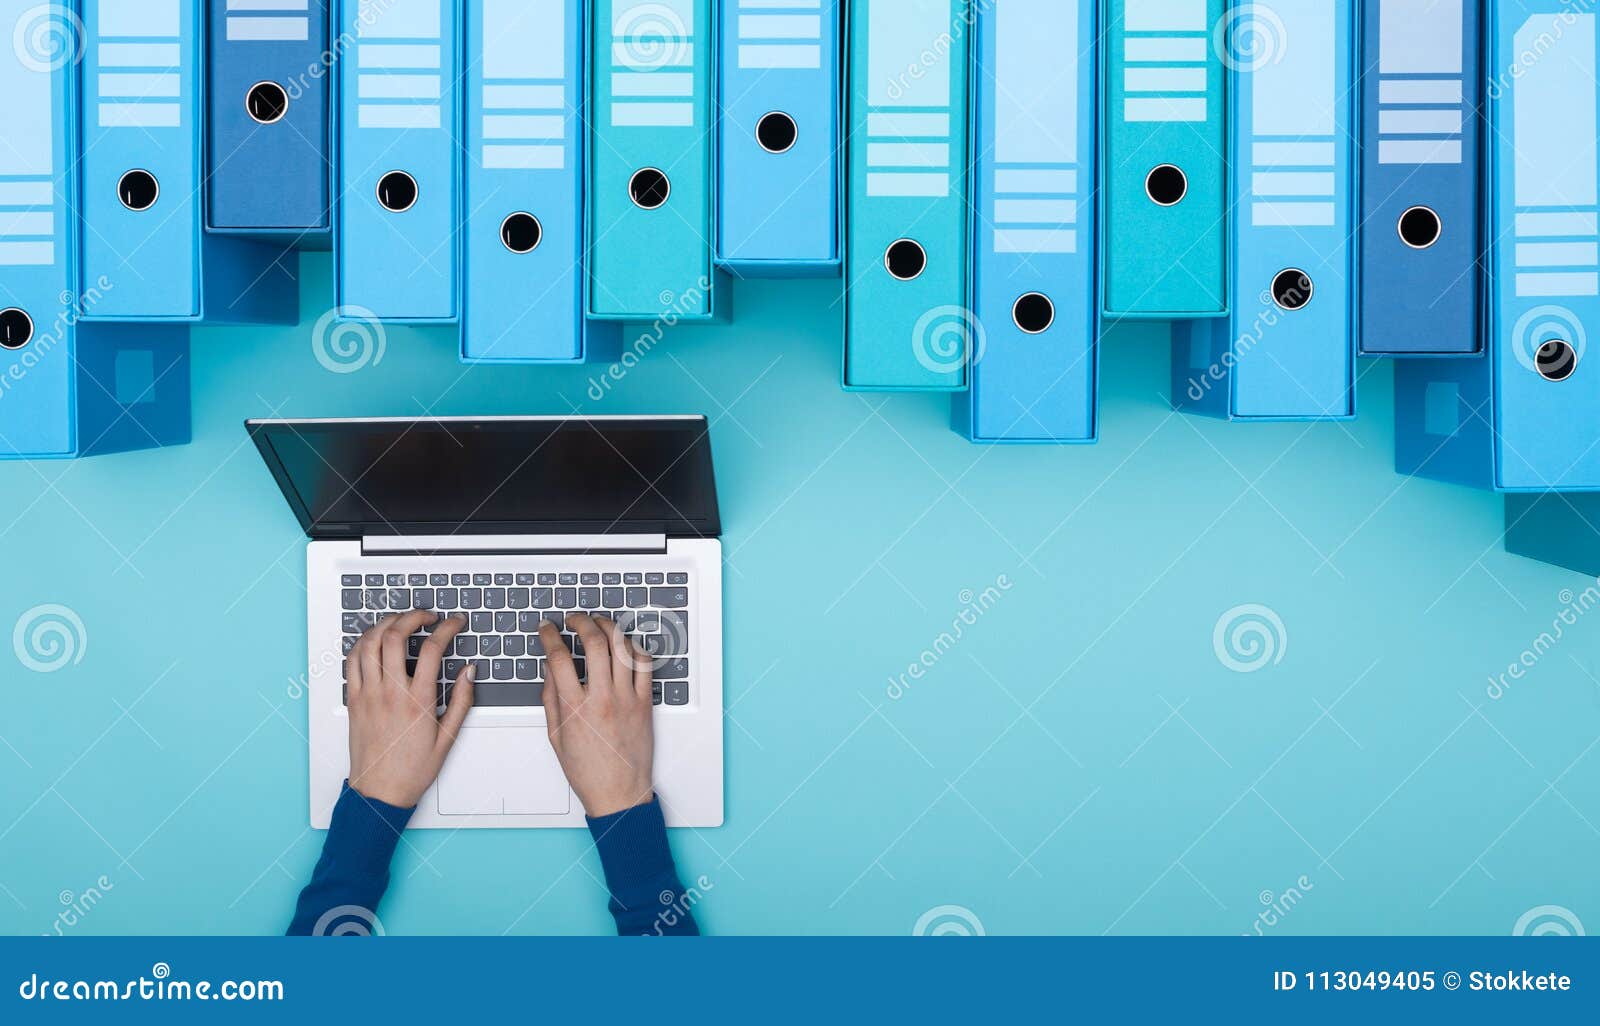 searching files in the archive using a laptop